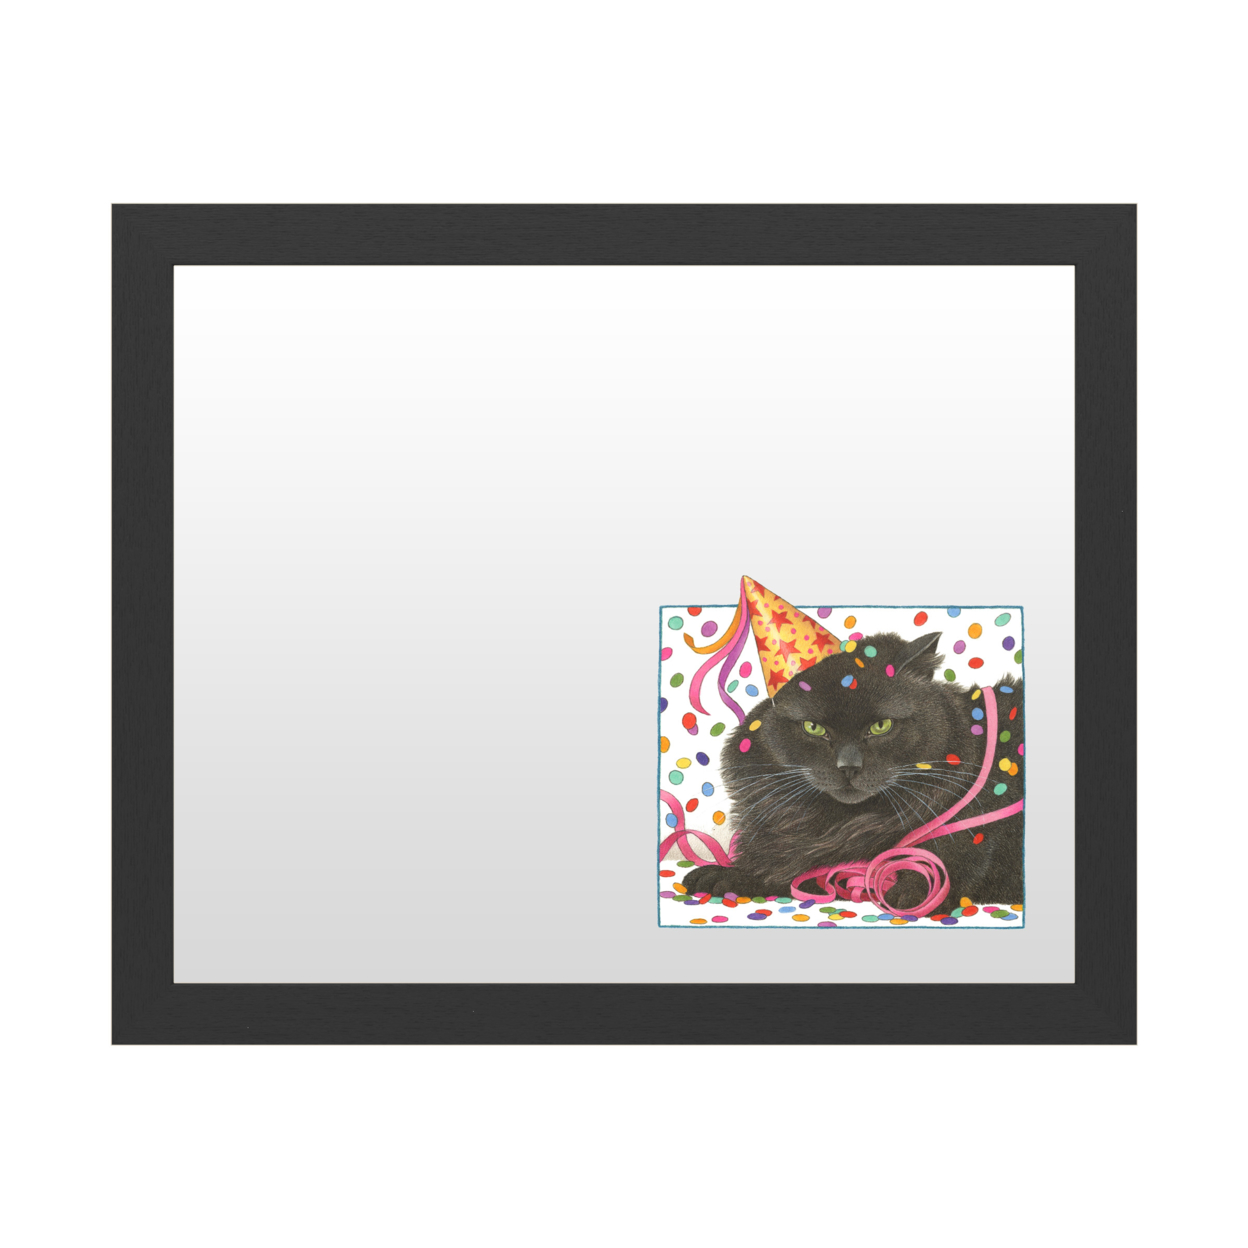 Dry Erase 16 X 20 Marker Board With Printed Artwork - Francien Van Westering Black Cat Birthday White Board - Ready To Hang